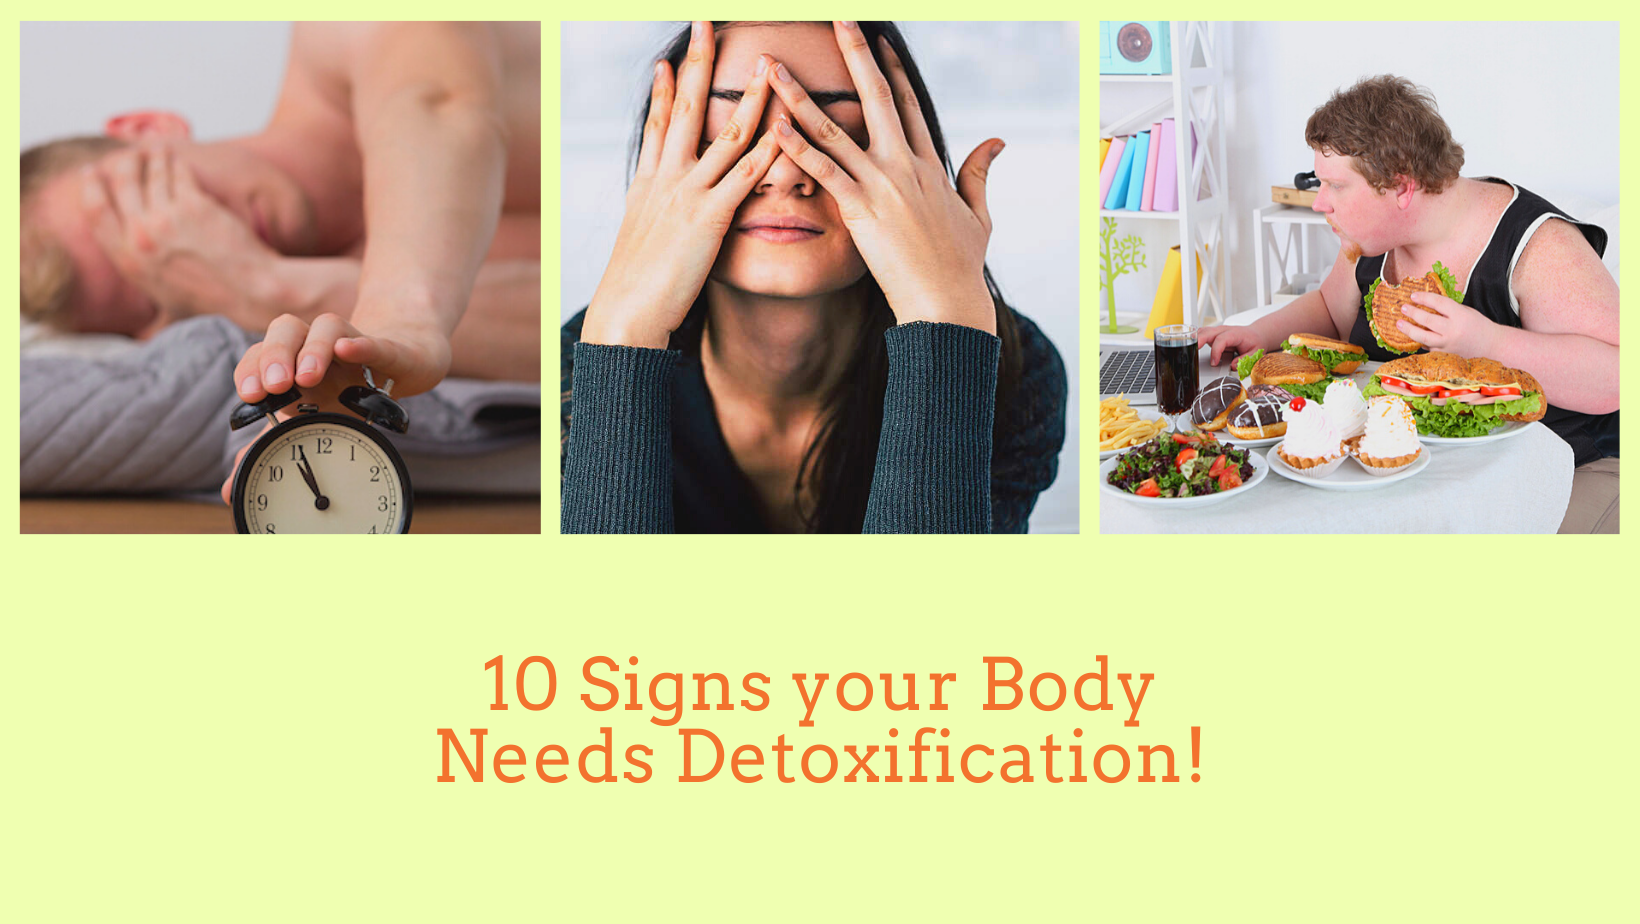 10 signs your body need detoxification